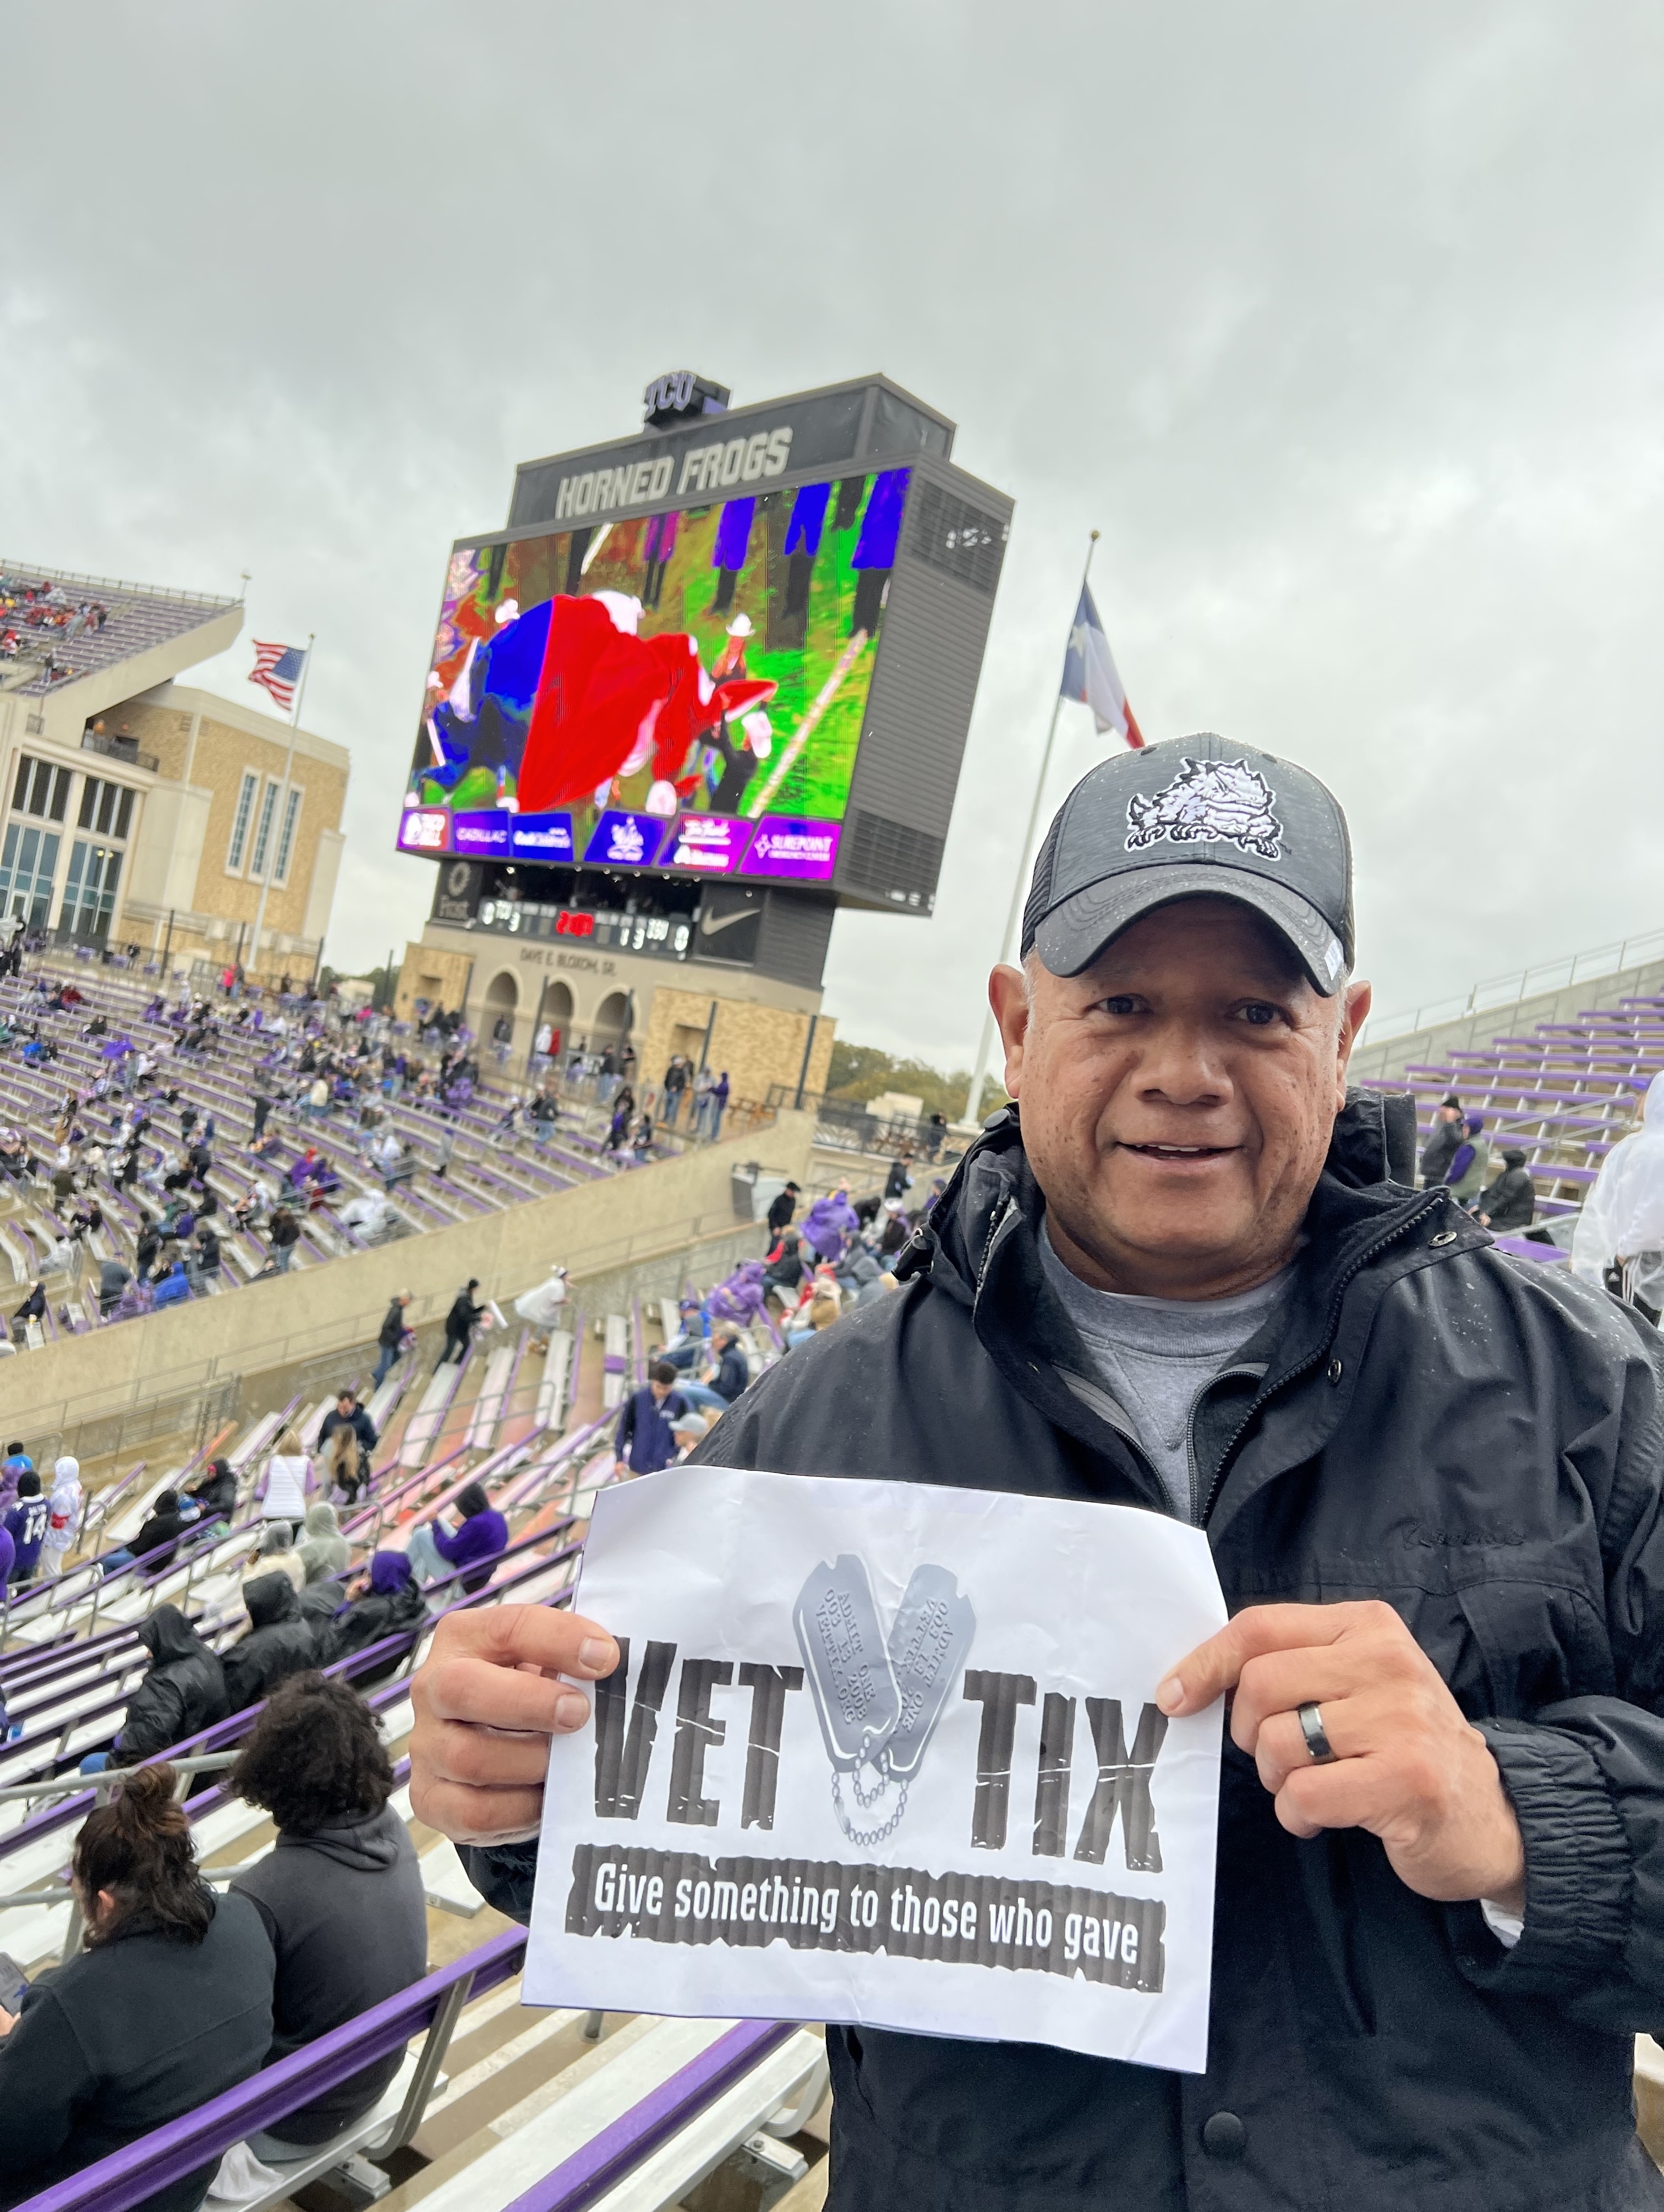 Texas Christian Horned Frogs - NCAA Football vs Iowa State Cyclones